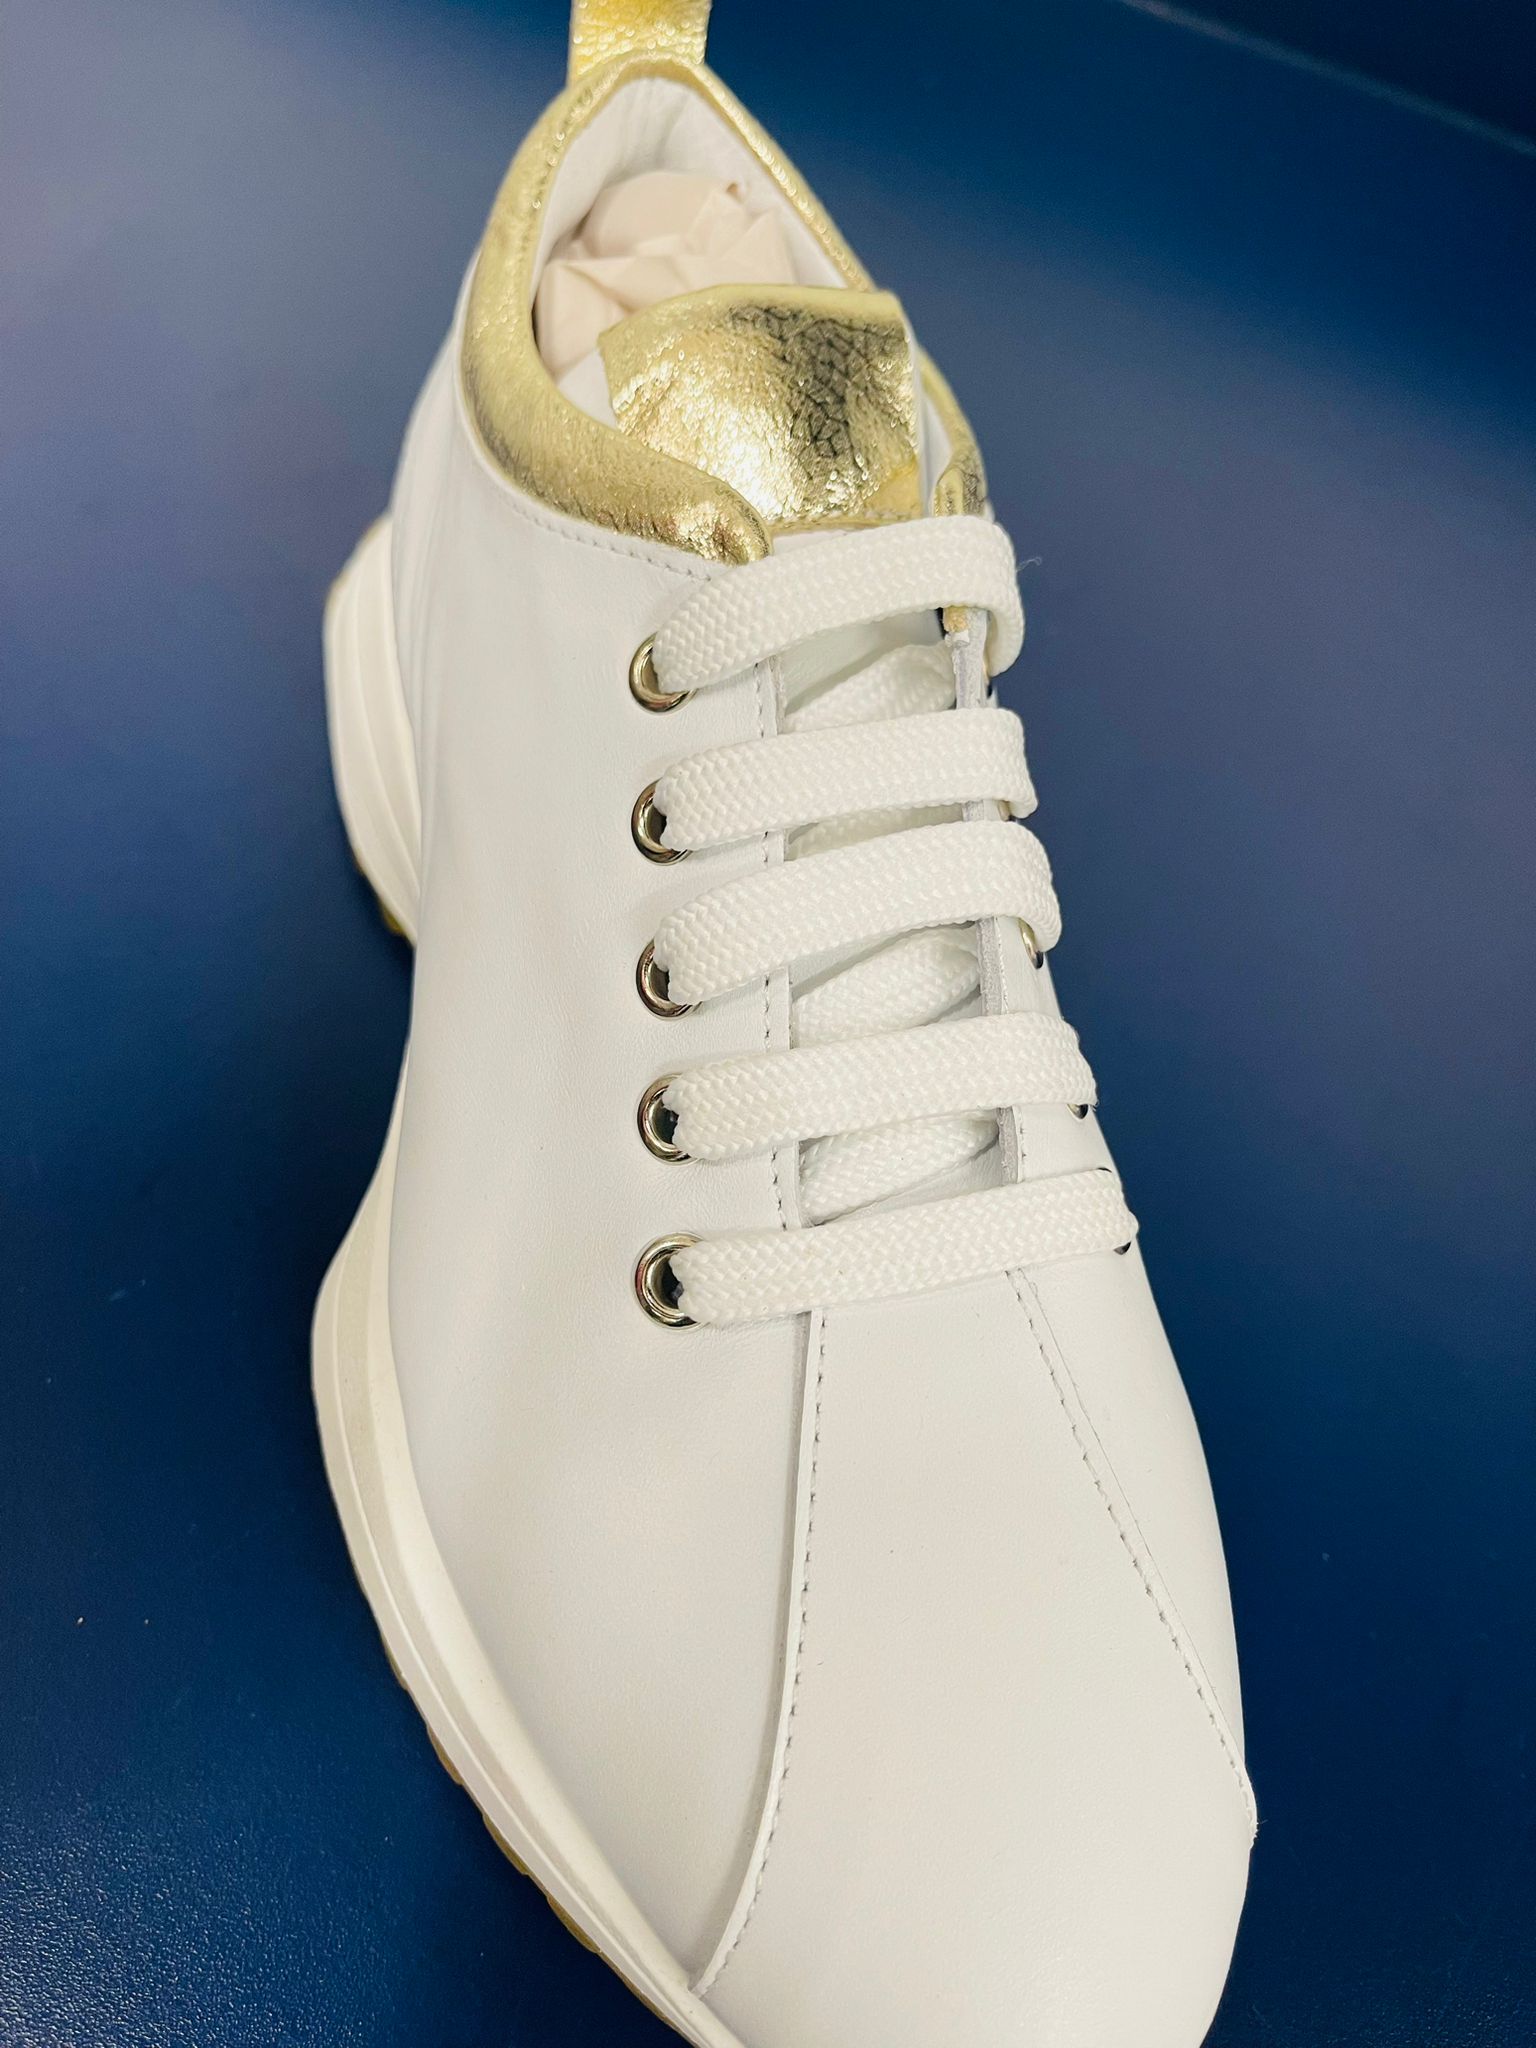 White And Gold Sneaker Laces Up